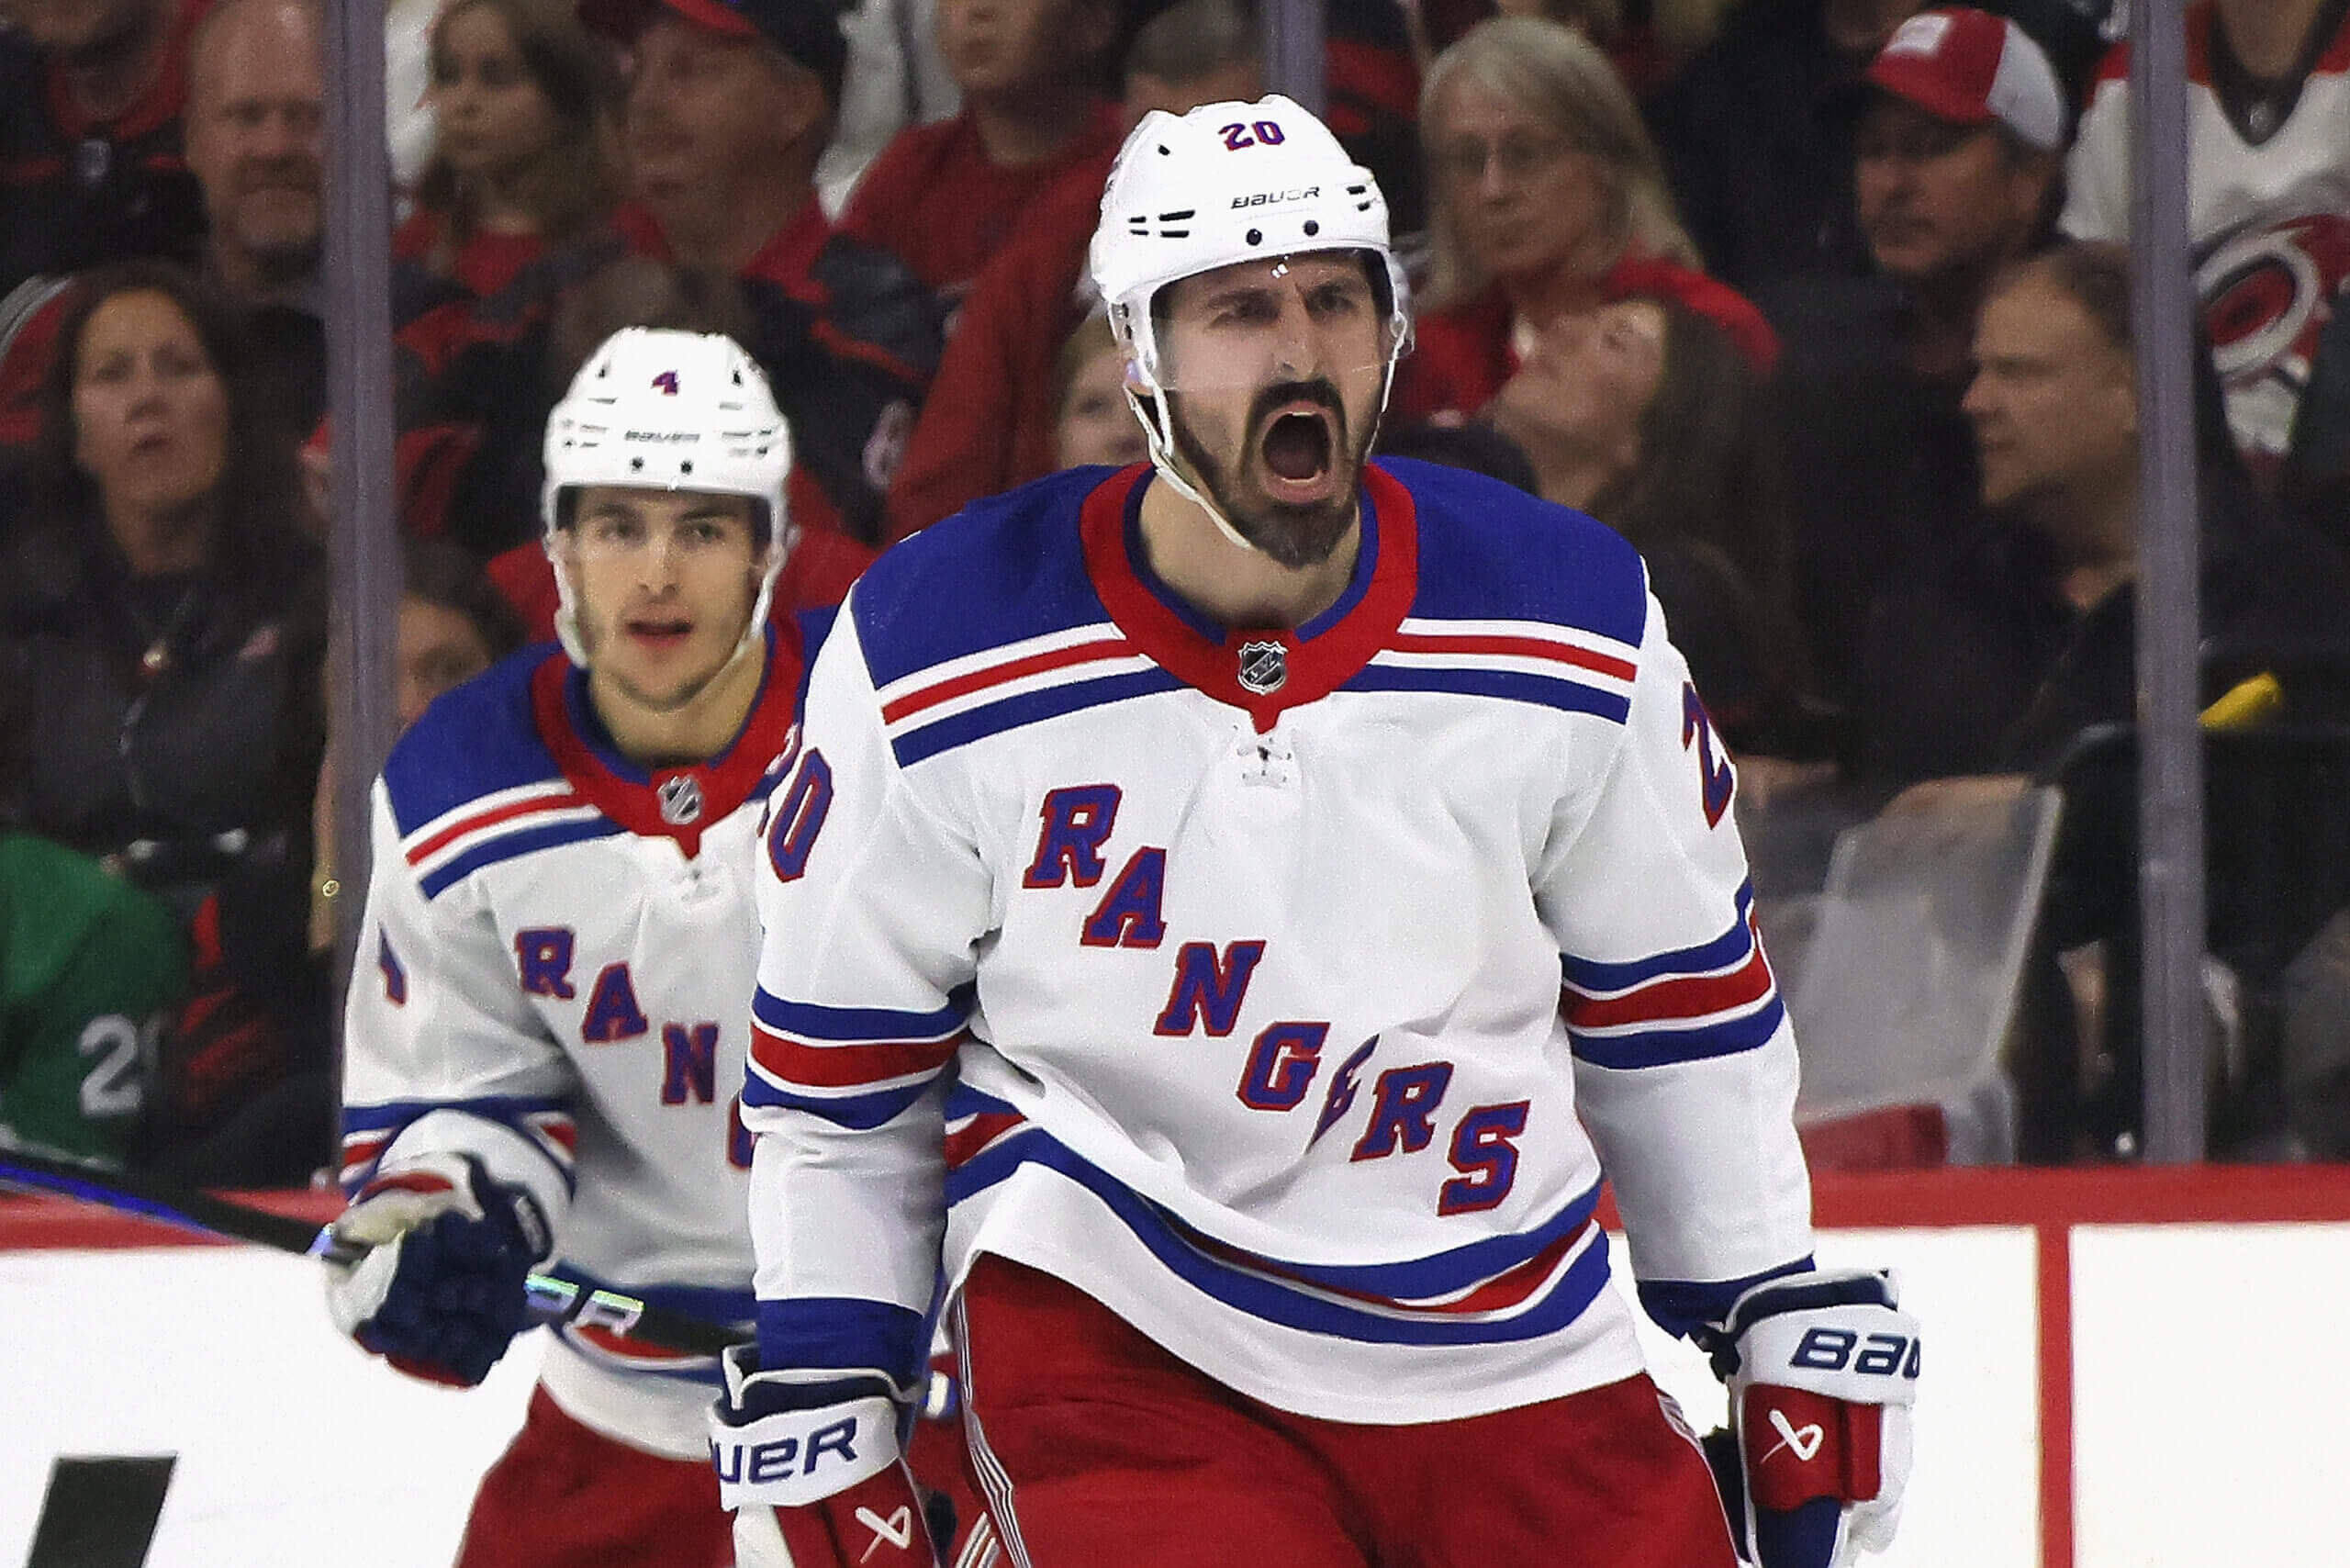 Ruthless Rangers penalty kill has Hurricanes on the brink